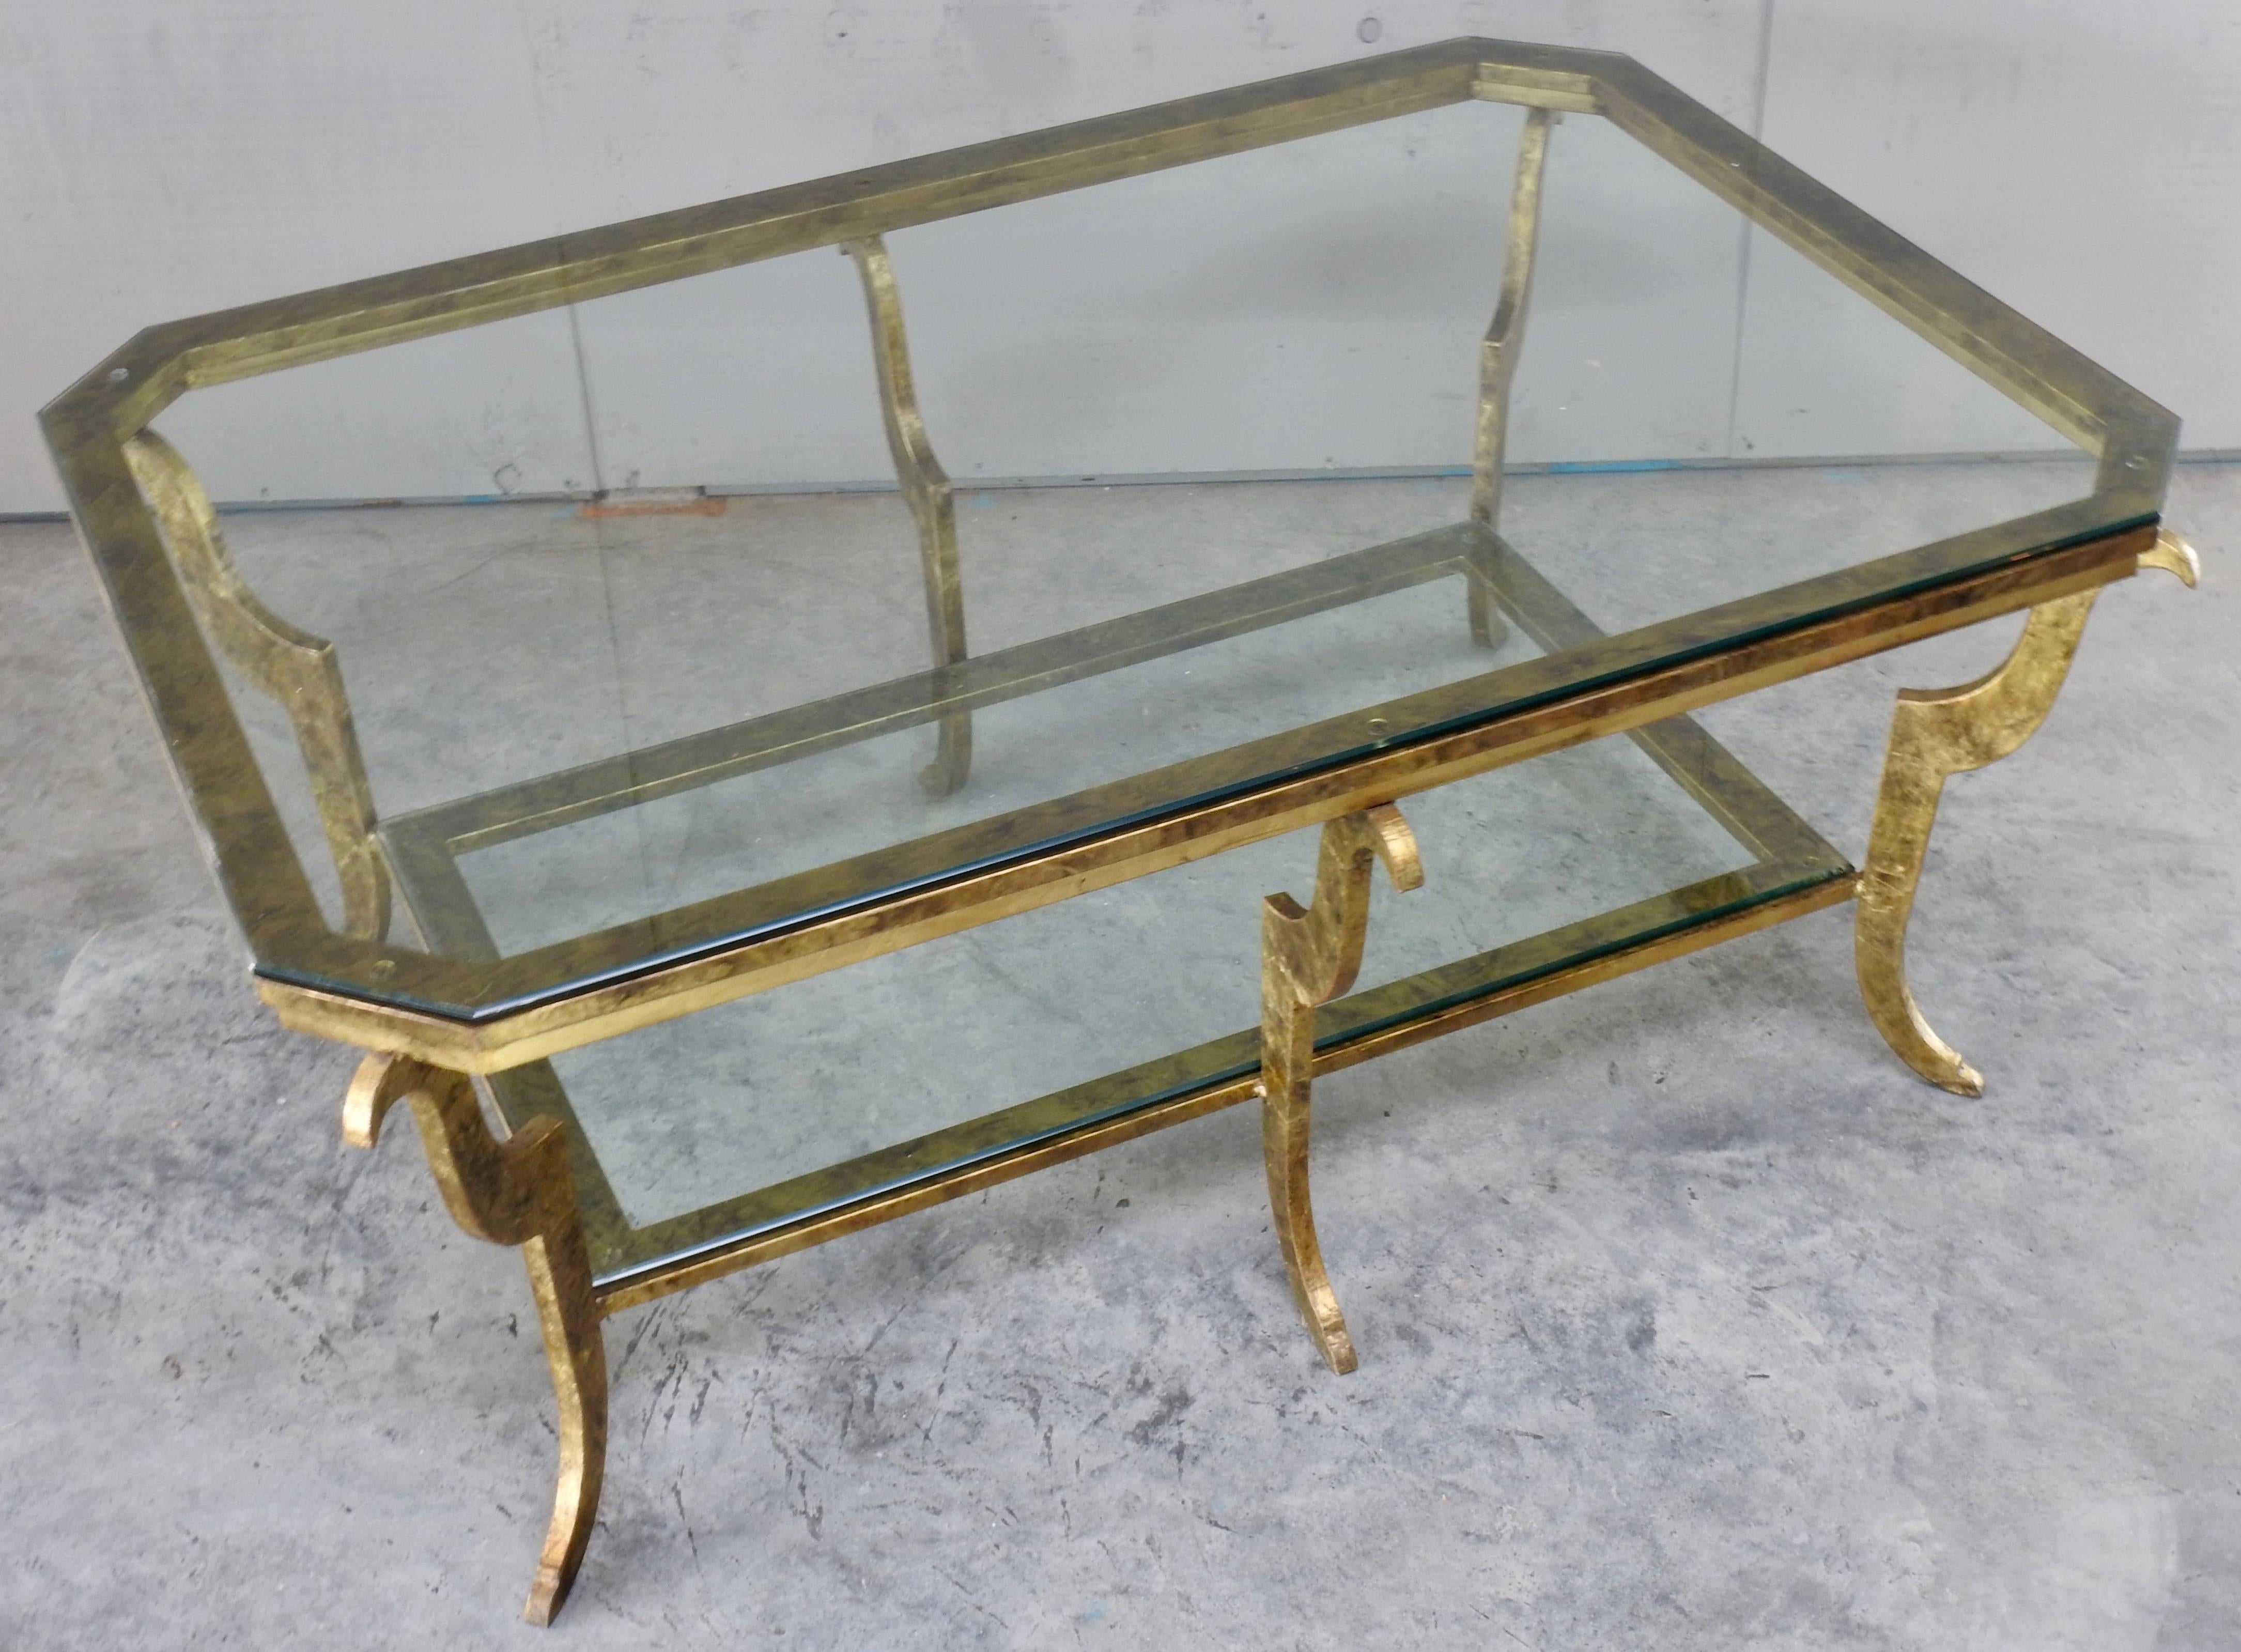 Two layers of heavy beveled glass adorn this Hollywood Regency cocktail table. The glass sits atop a gilded steel frame with texture. Graceful curved legs complete this look.